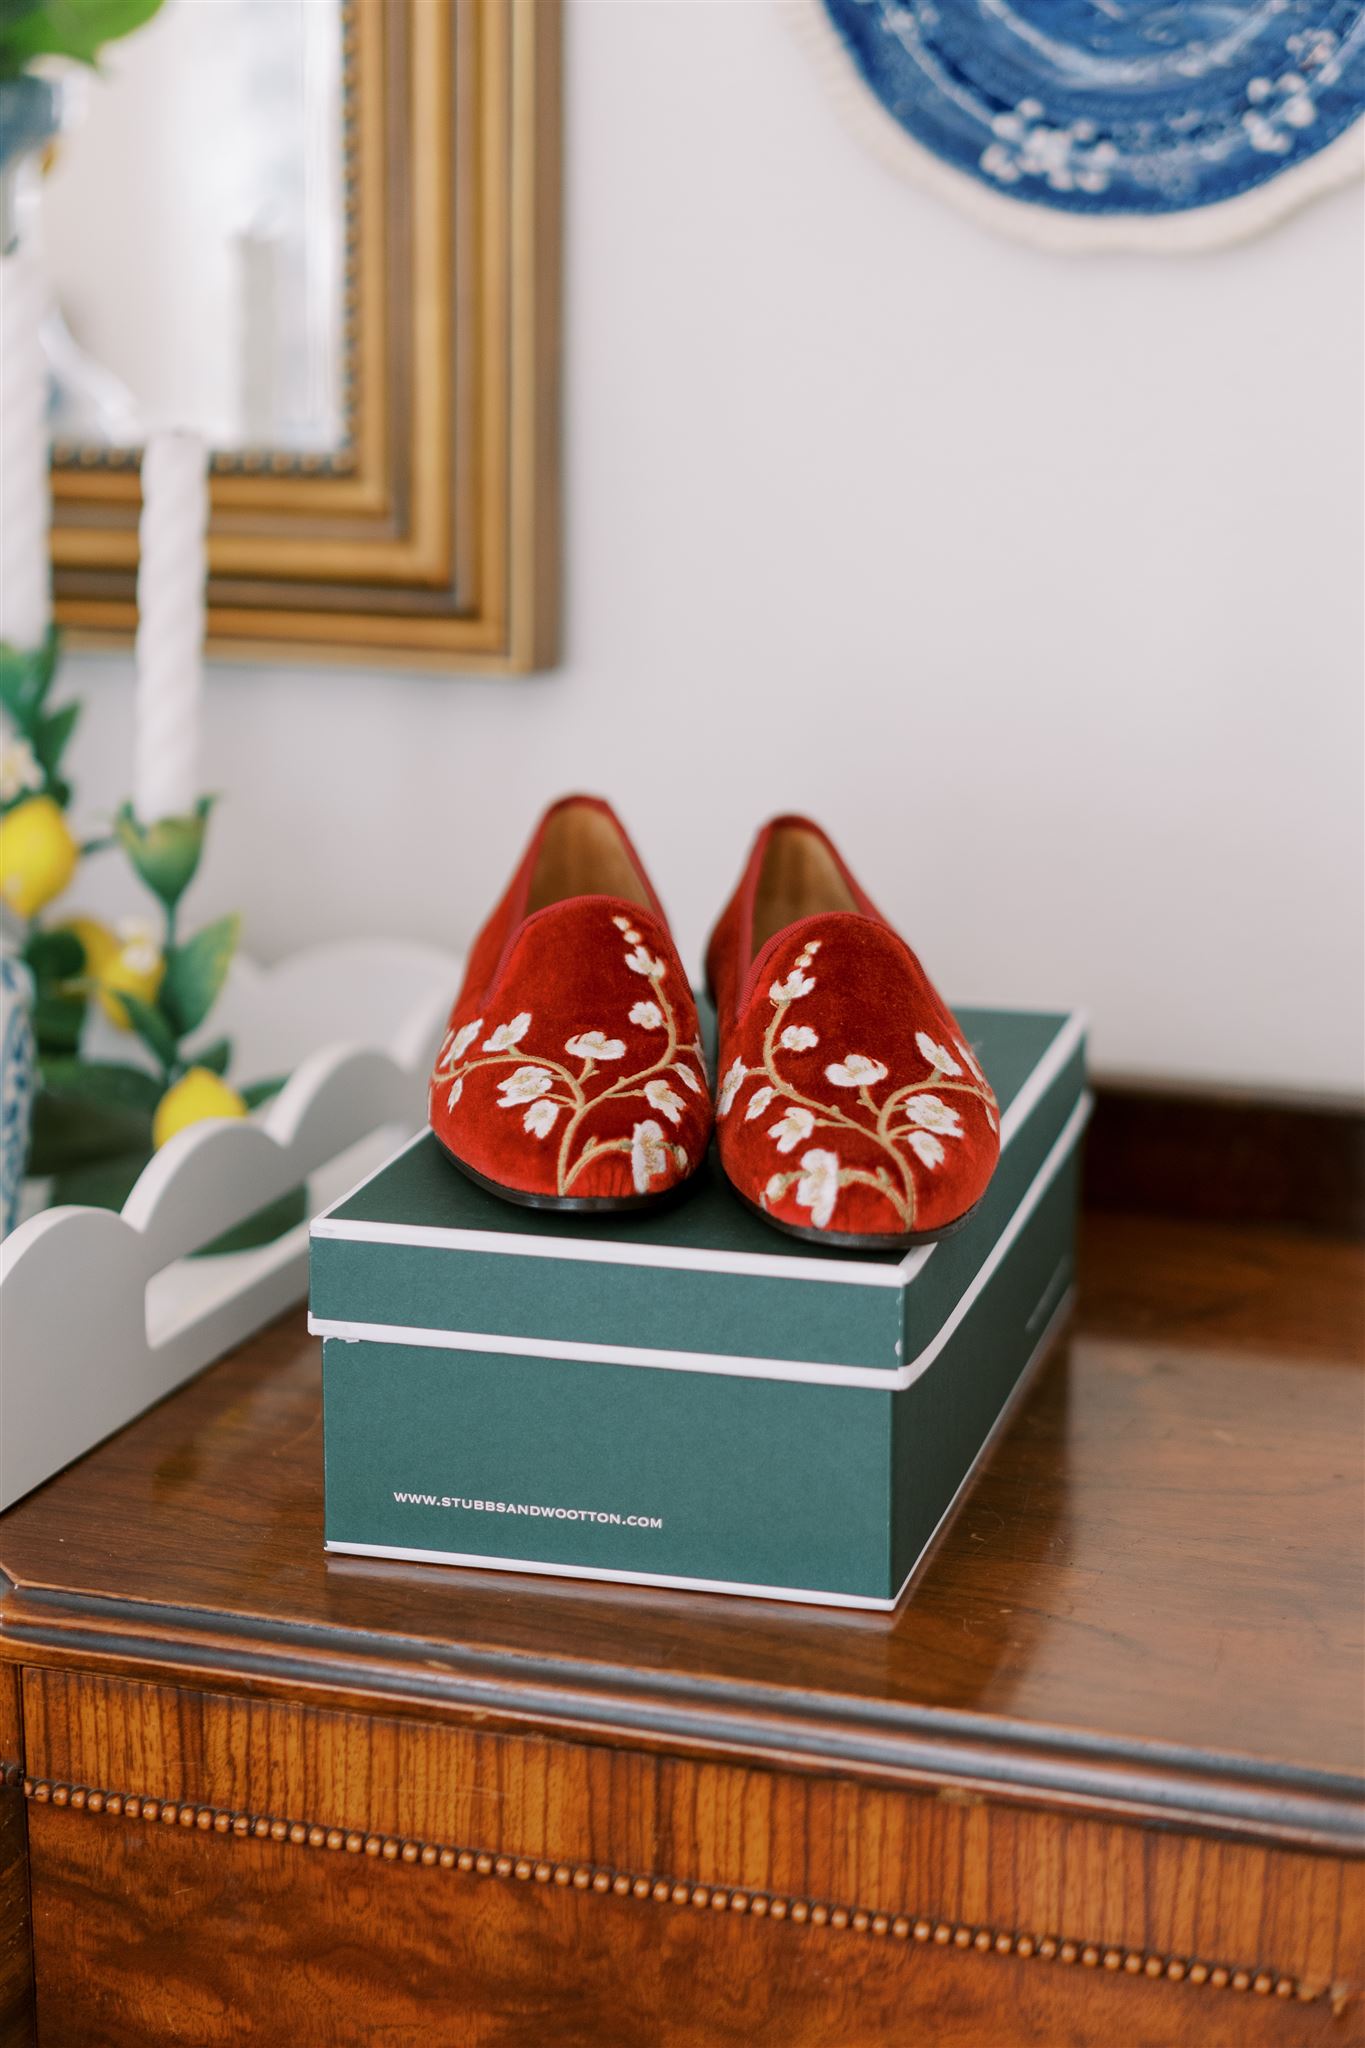 Stubbs and Wootton discount code, floral design shoes, velvet flats, velvet loafers